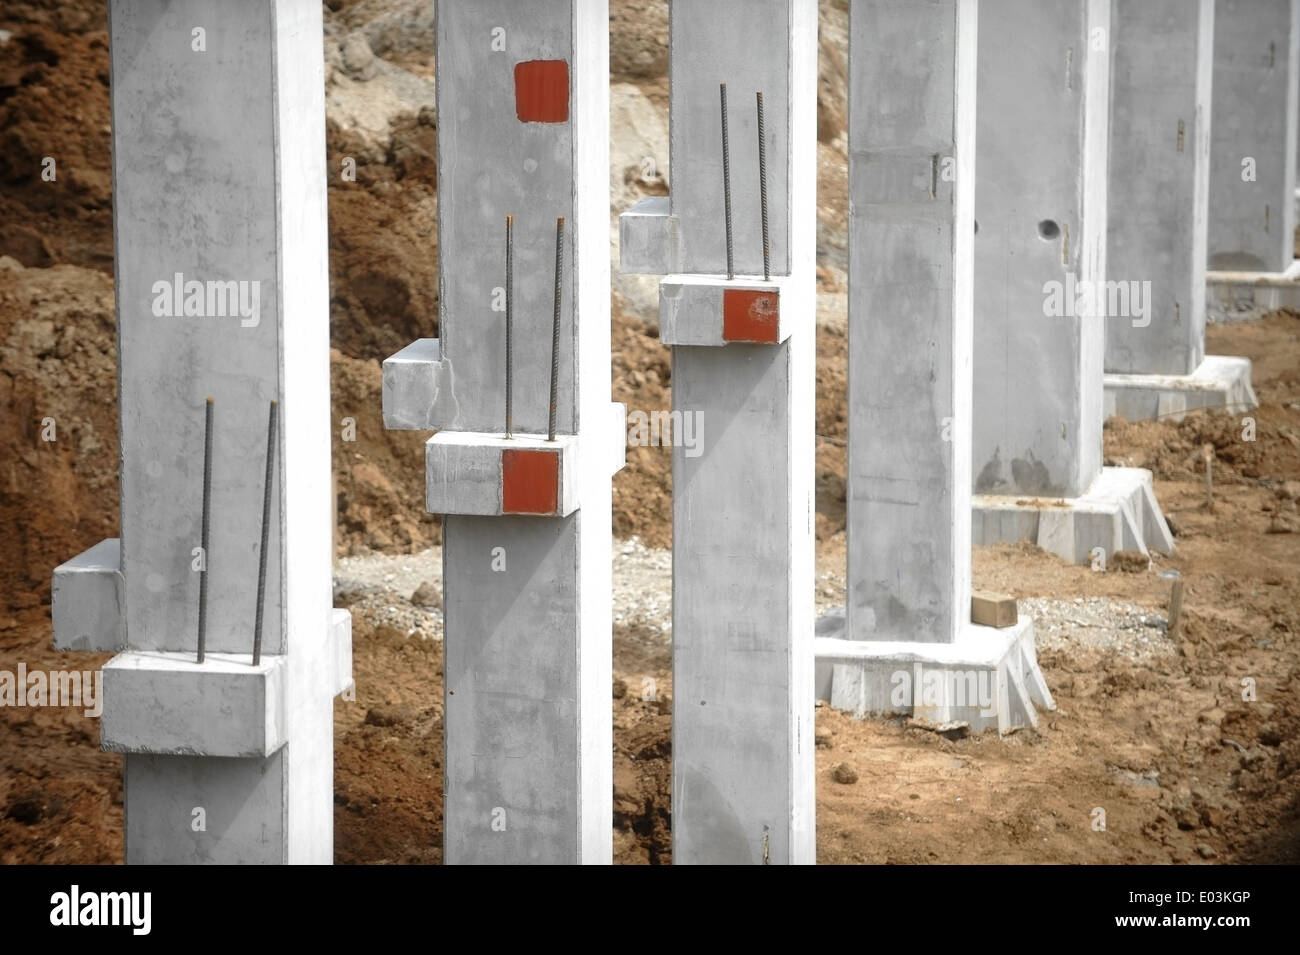 Construction site detail with several concrete pillars Stock Photo